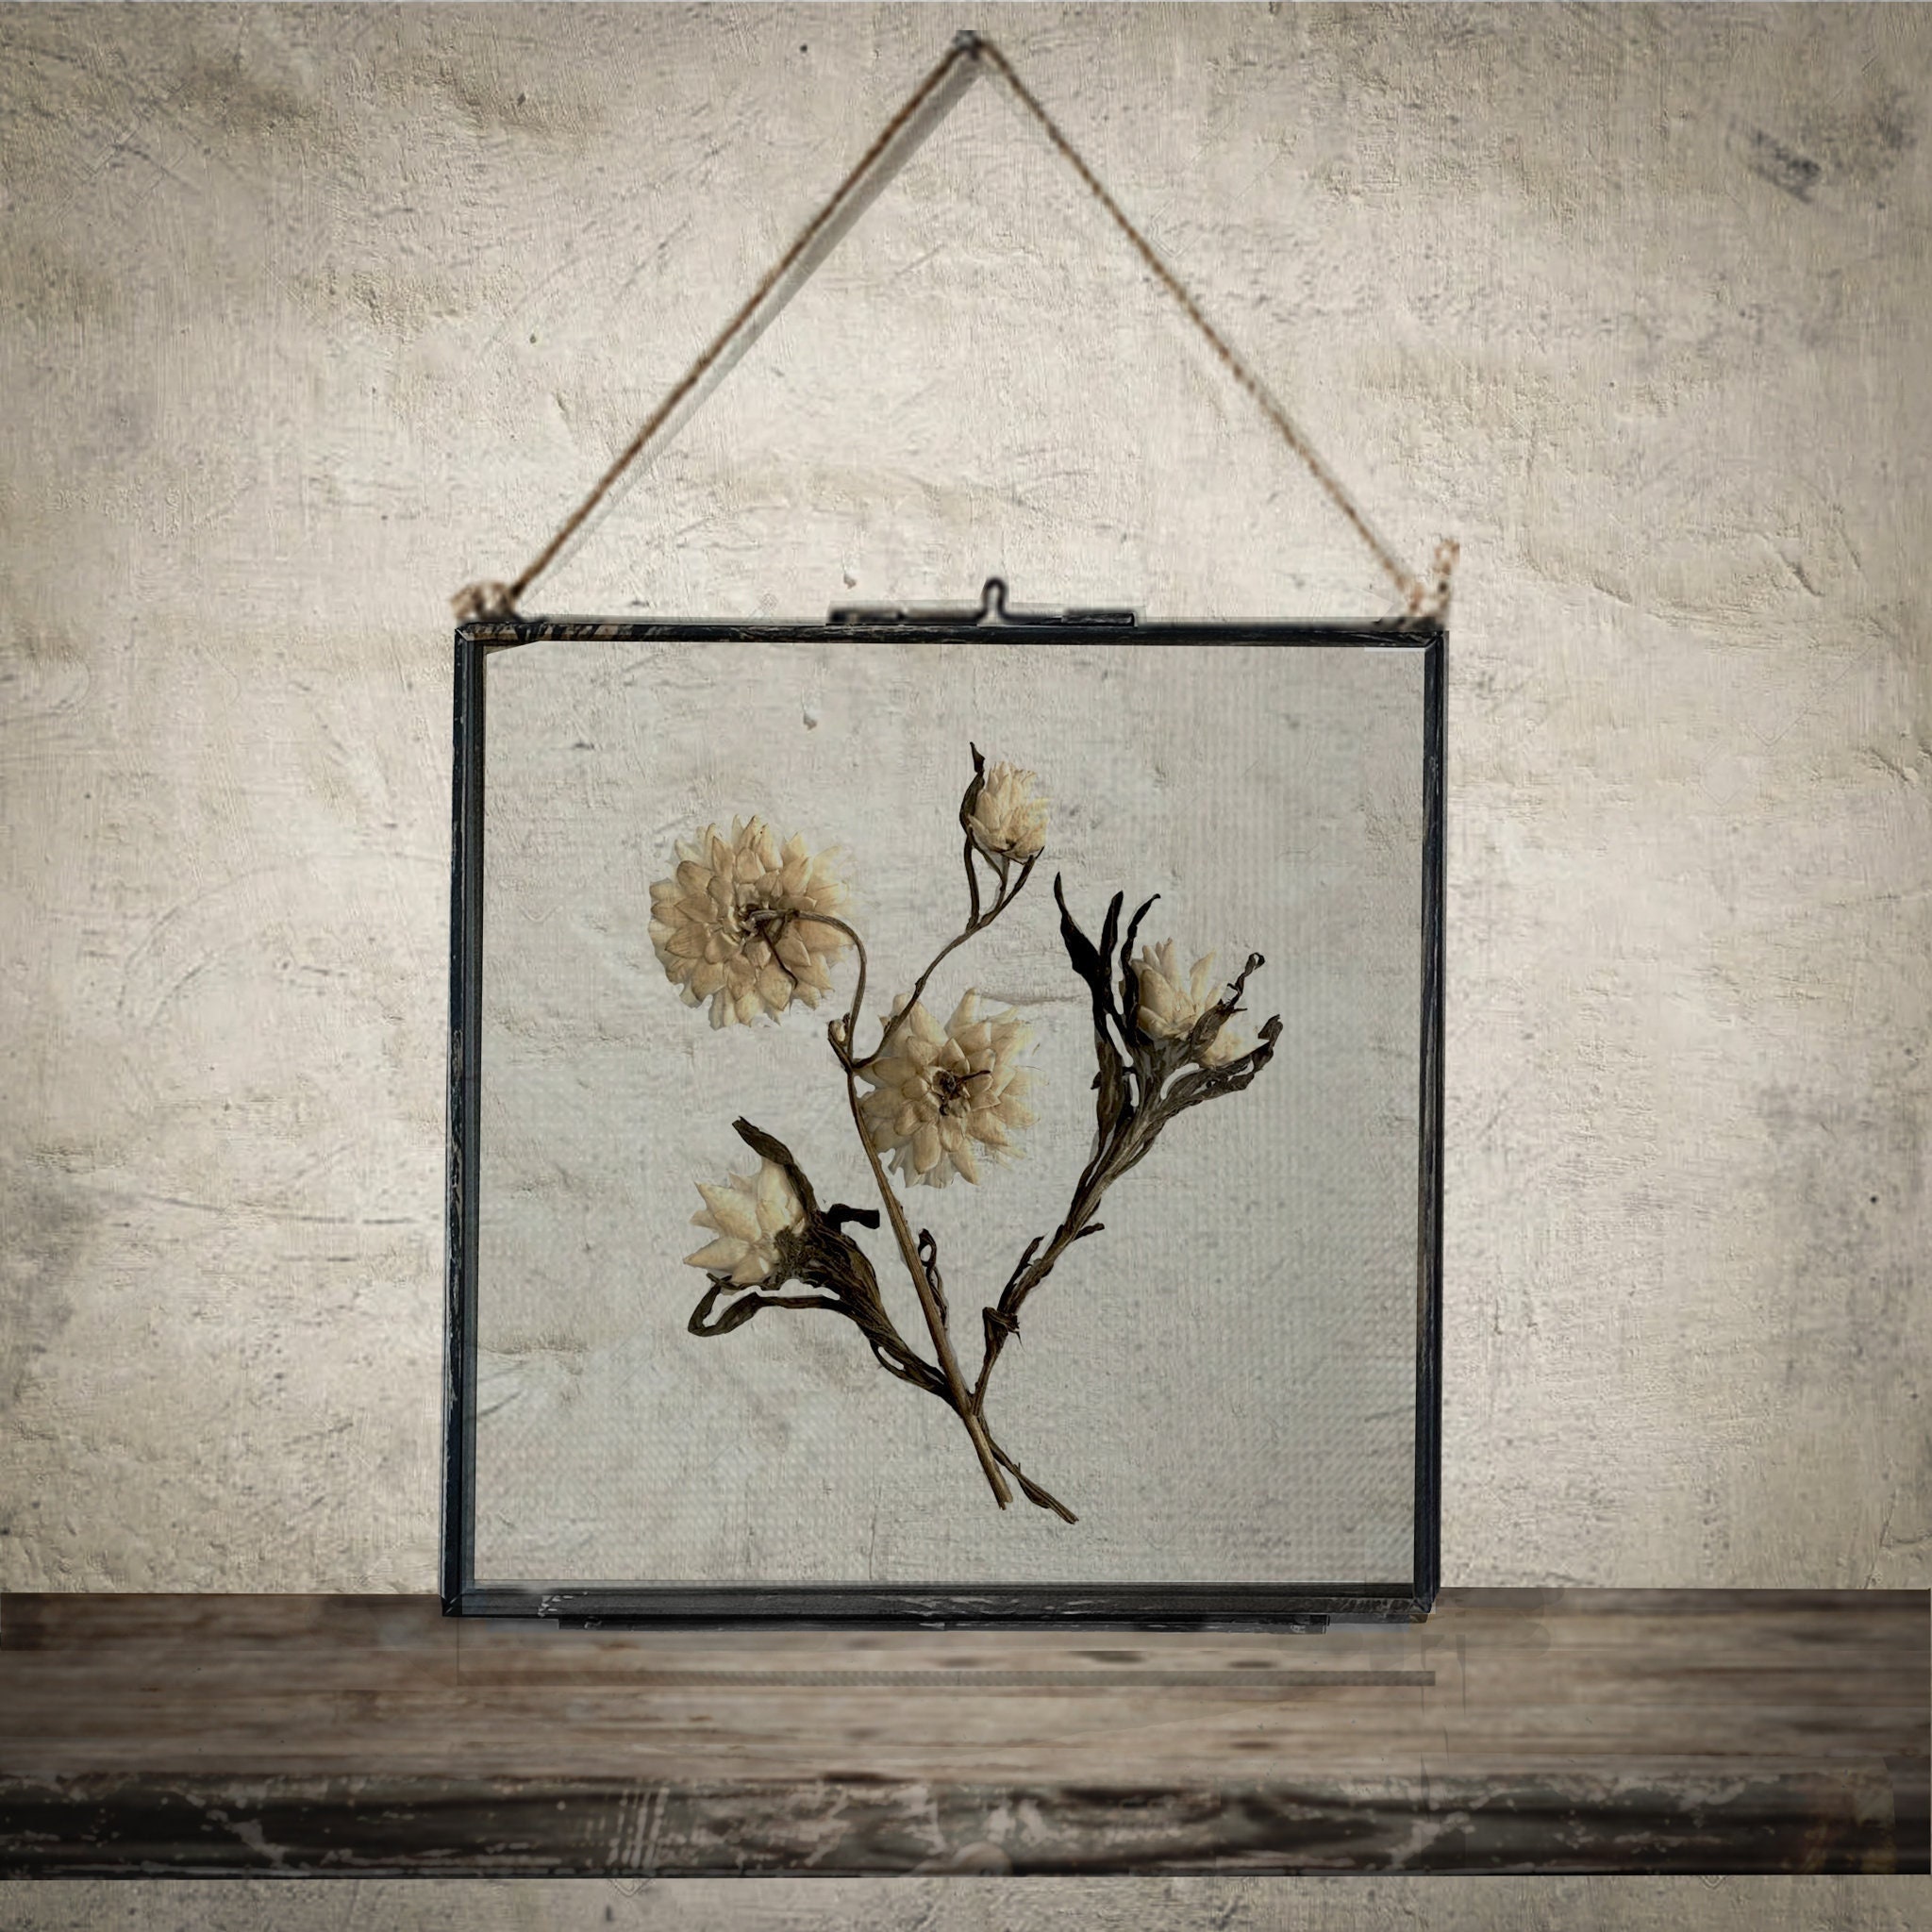 Dried Pressed Flowers in Hanging Glass Frame, Framed Dried Flowers, Pressed  Flower Frame, Wall Art Home Decor, Special Housewarming Gift - Etsy